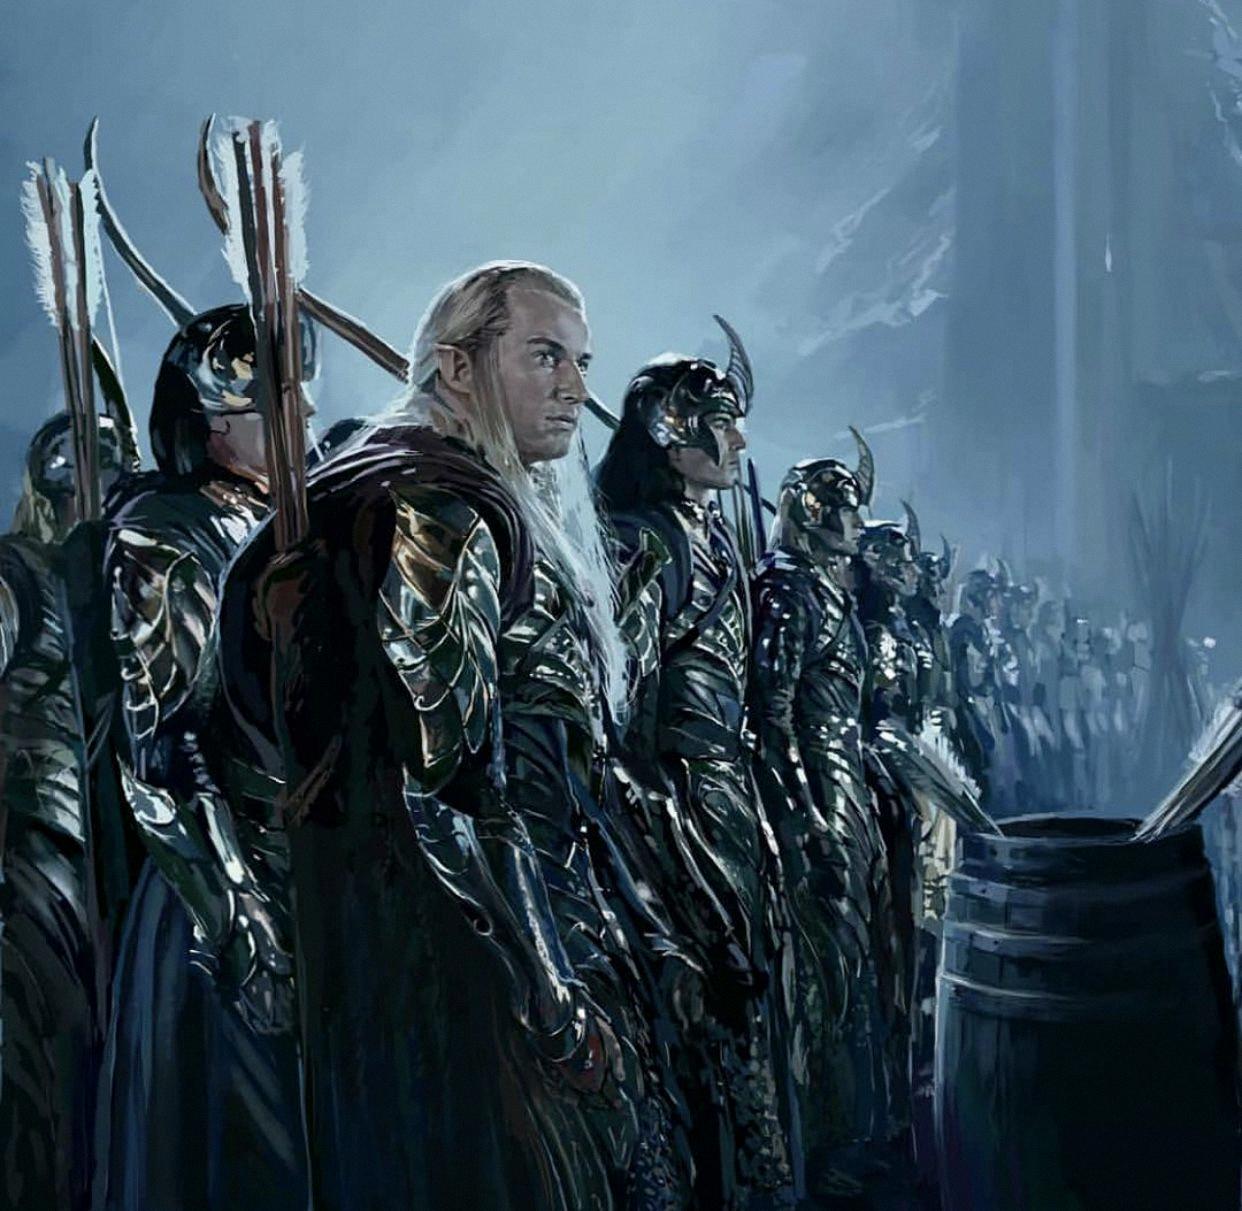 The Elves Involvement in the Battle at Helm's Deep